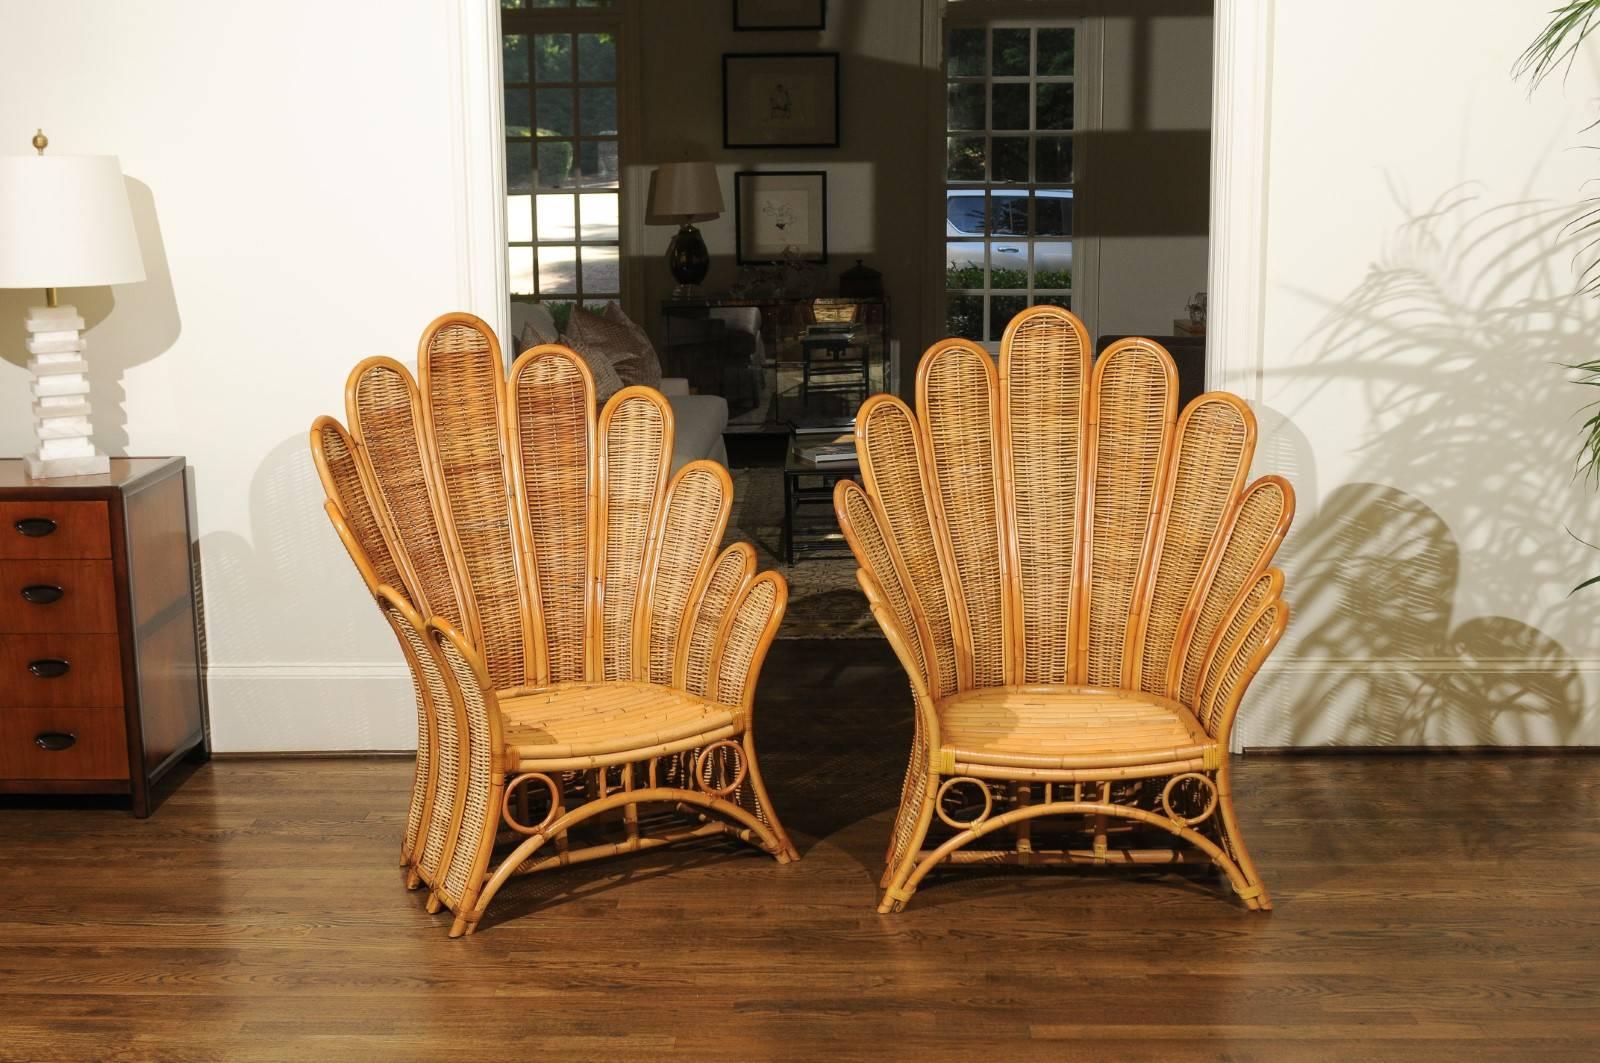 A staggering pair of large-scale club chairs, circa 1980. Beautifully conceived and expertly constructed rattan and wicker frame which captures the feel of Palm leaves; handsome leather binding accents. Important pieces that will establish the tone